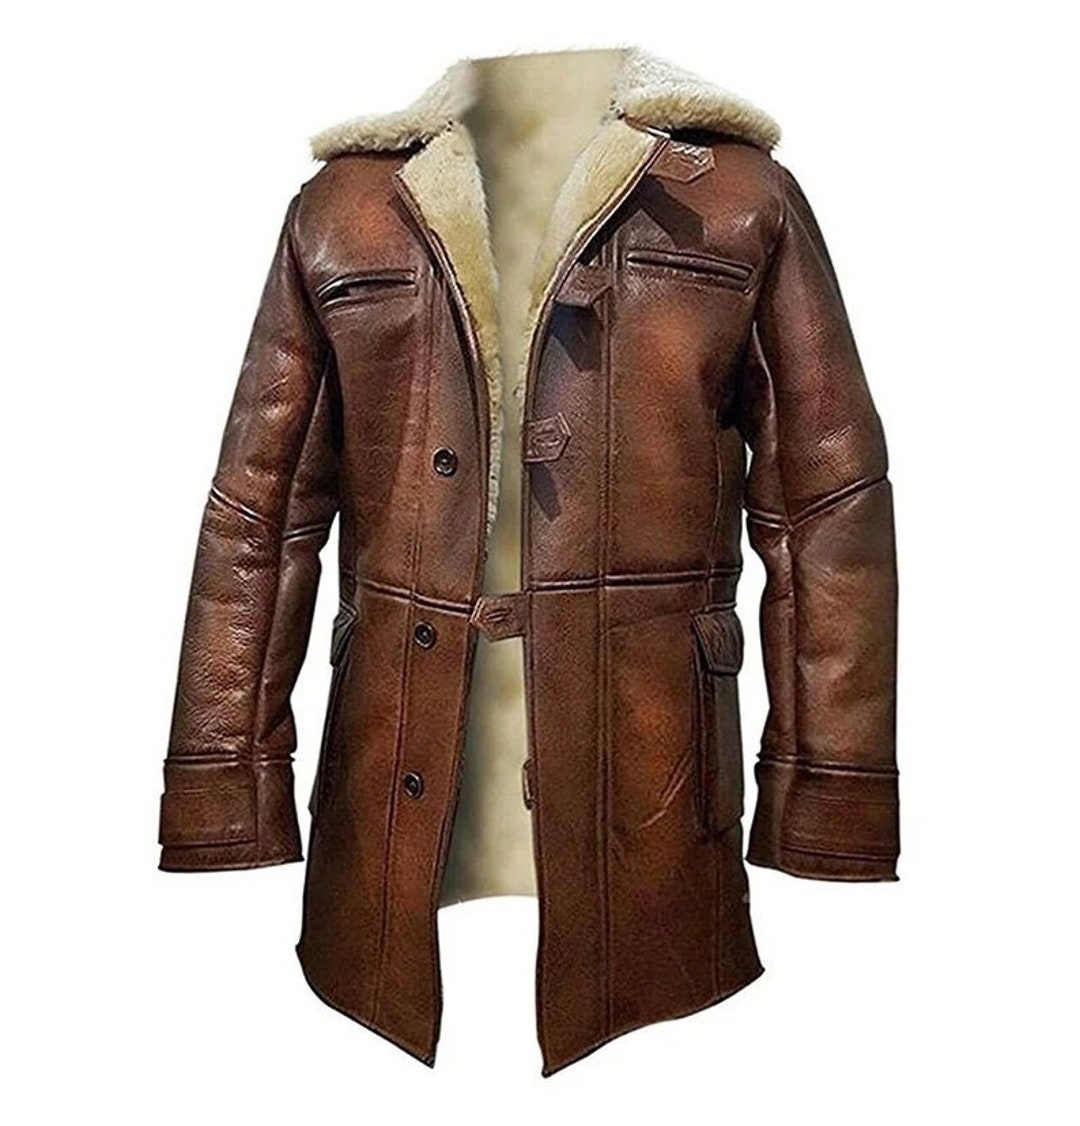 Trench Bane Coat Famous Tom Hardy Dark Knight Brown - Etsy